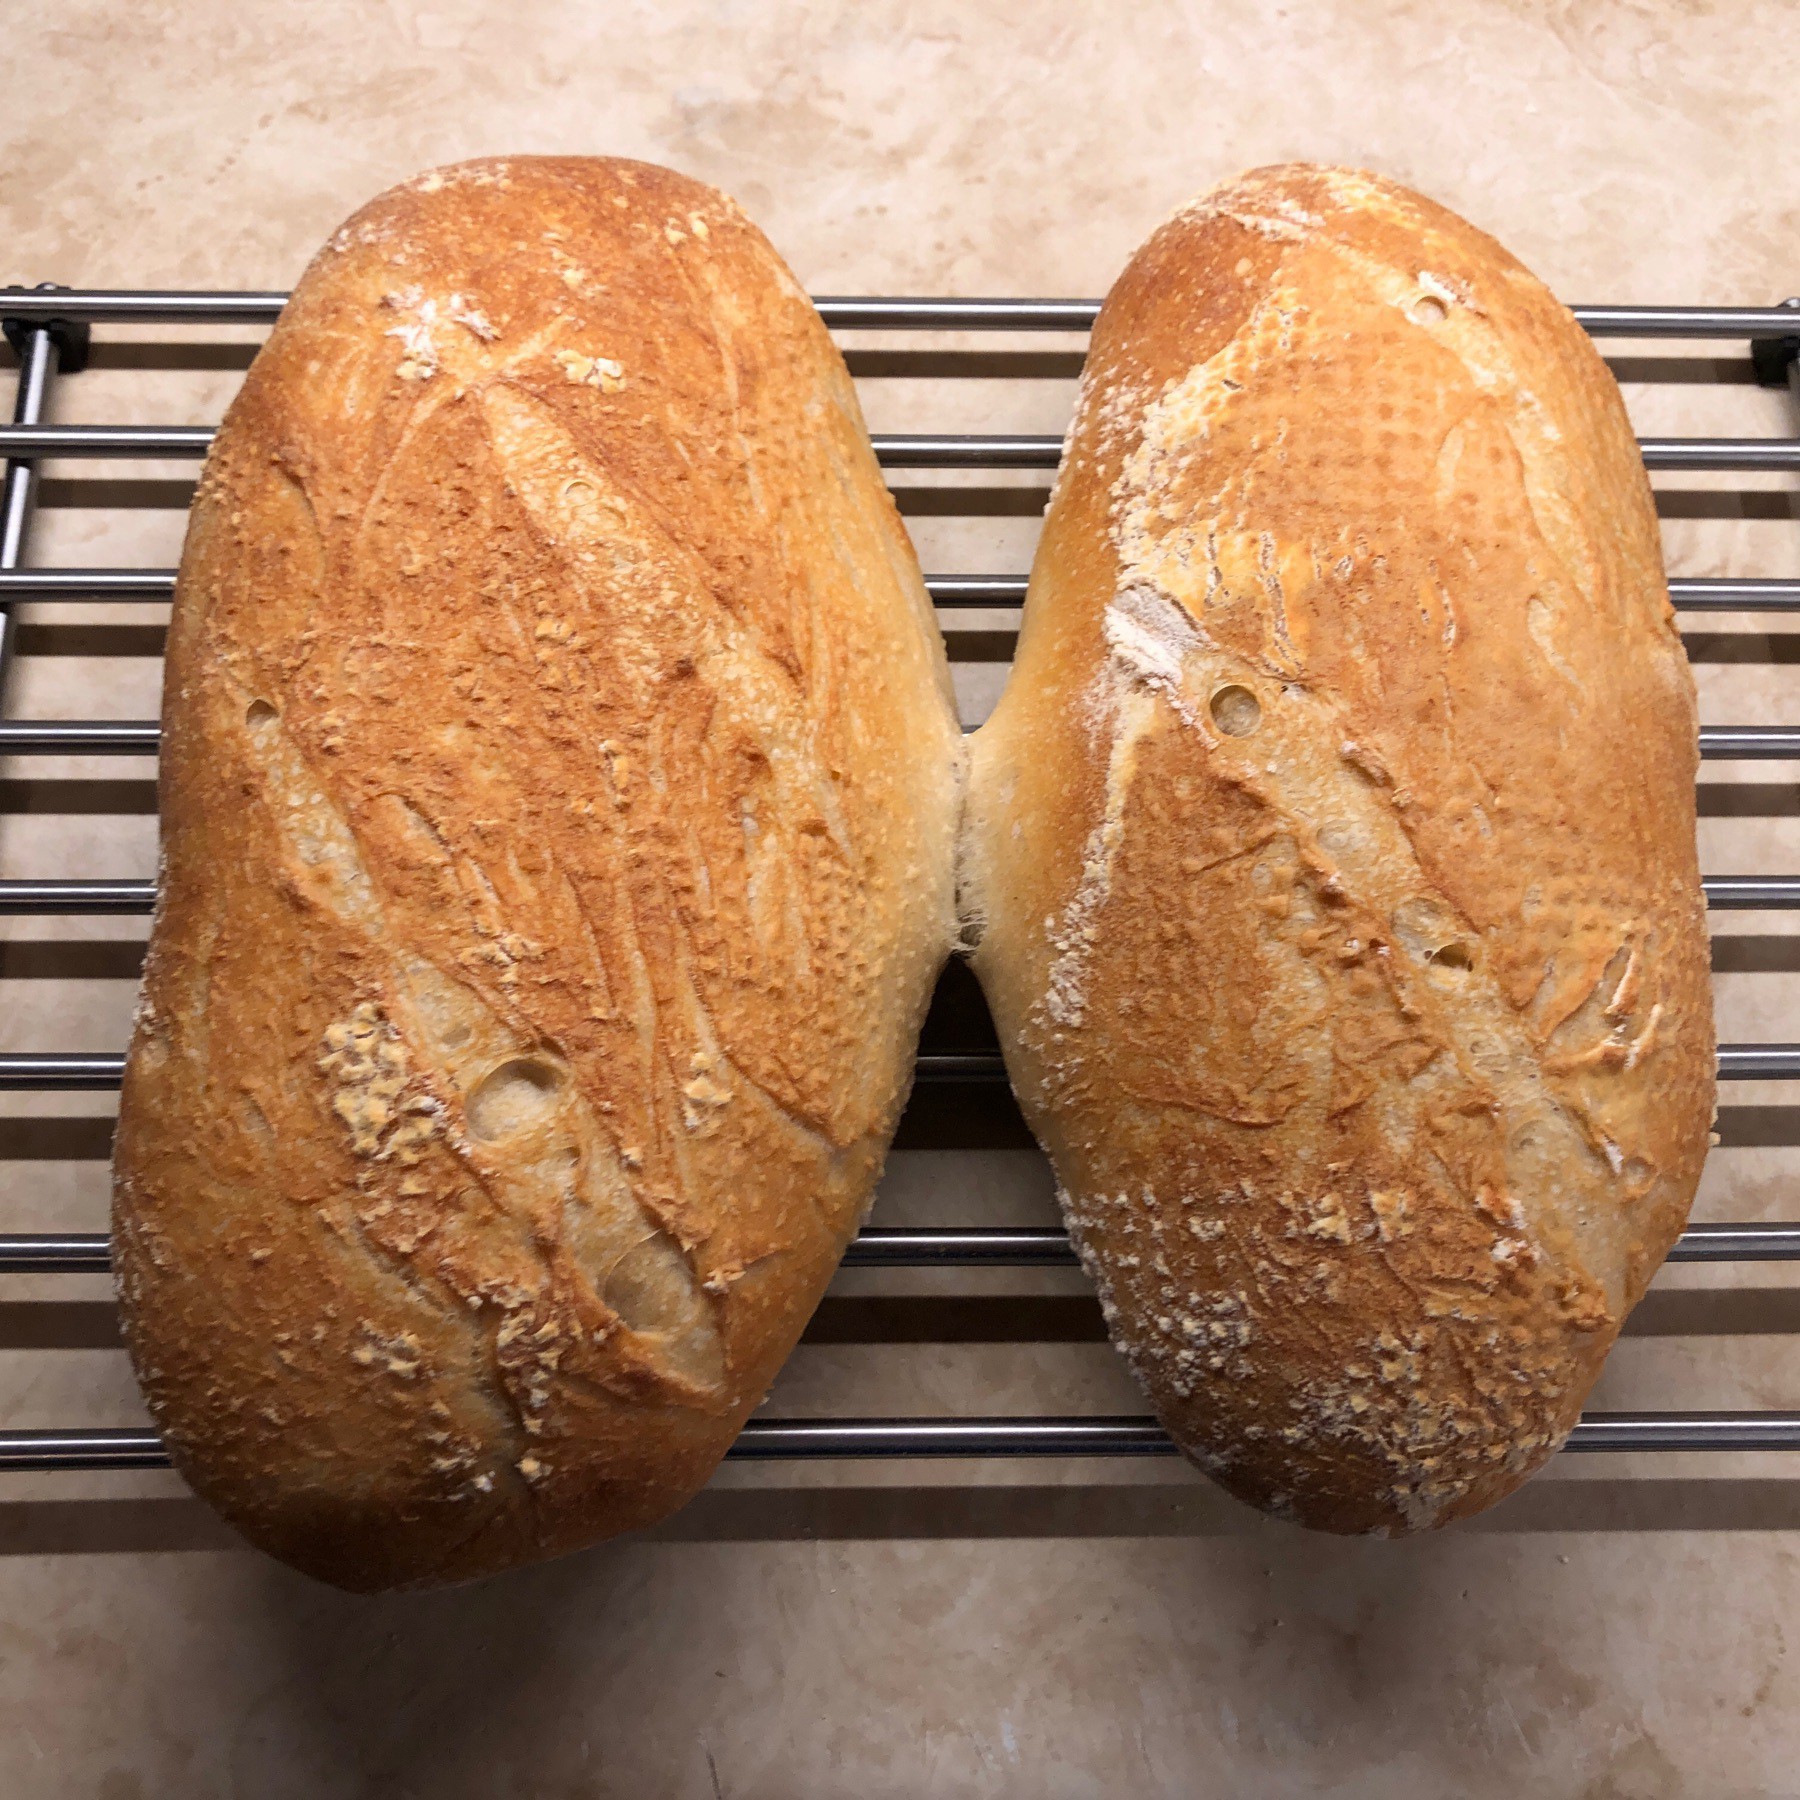 Two loaves of sourdough bread on cooling rack.